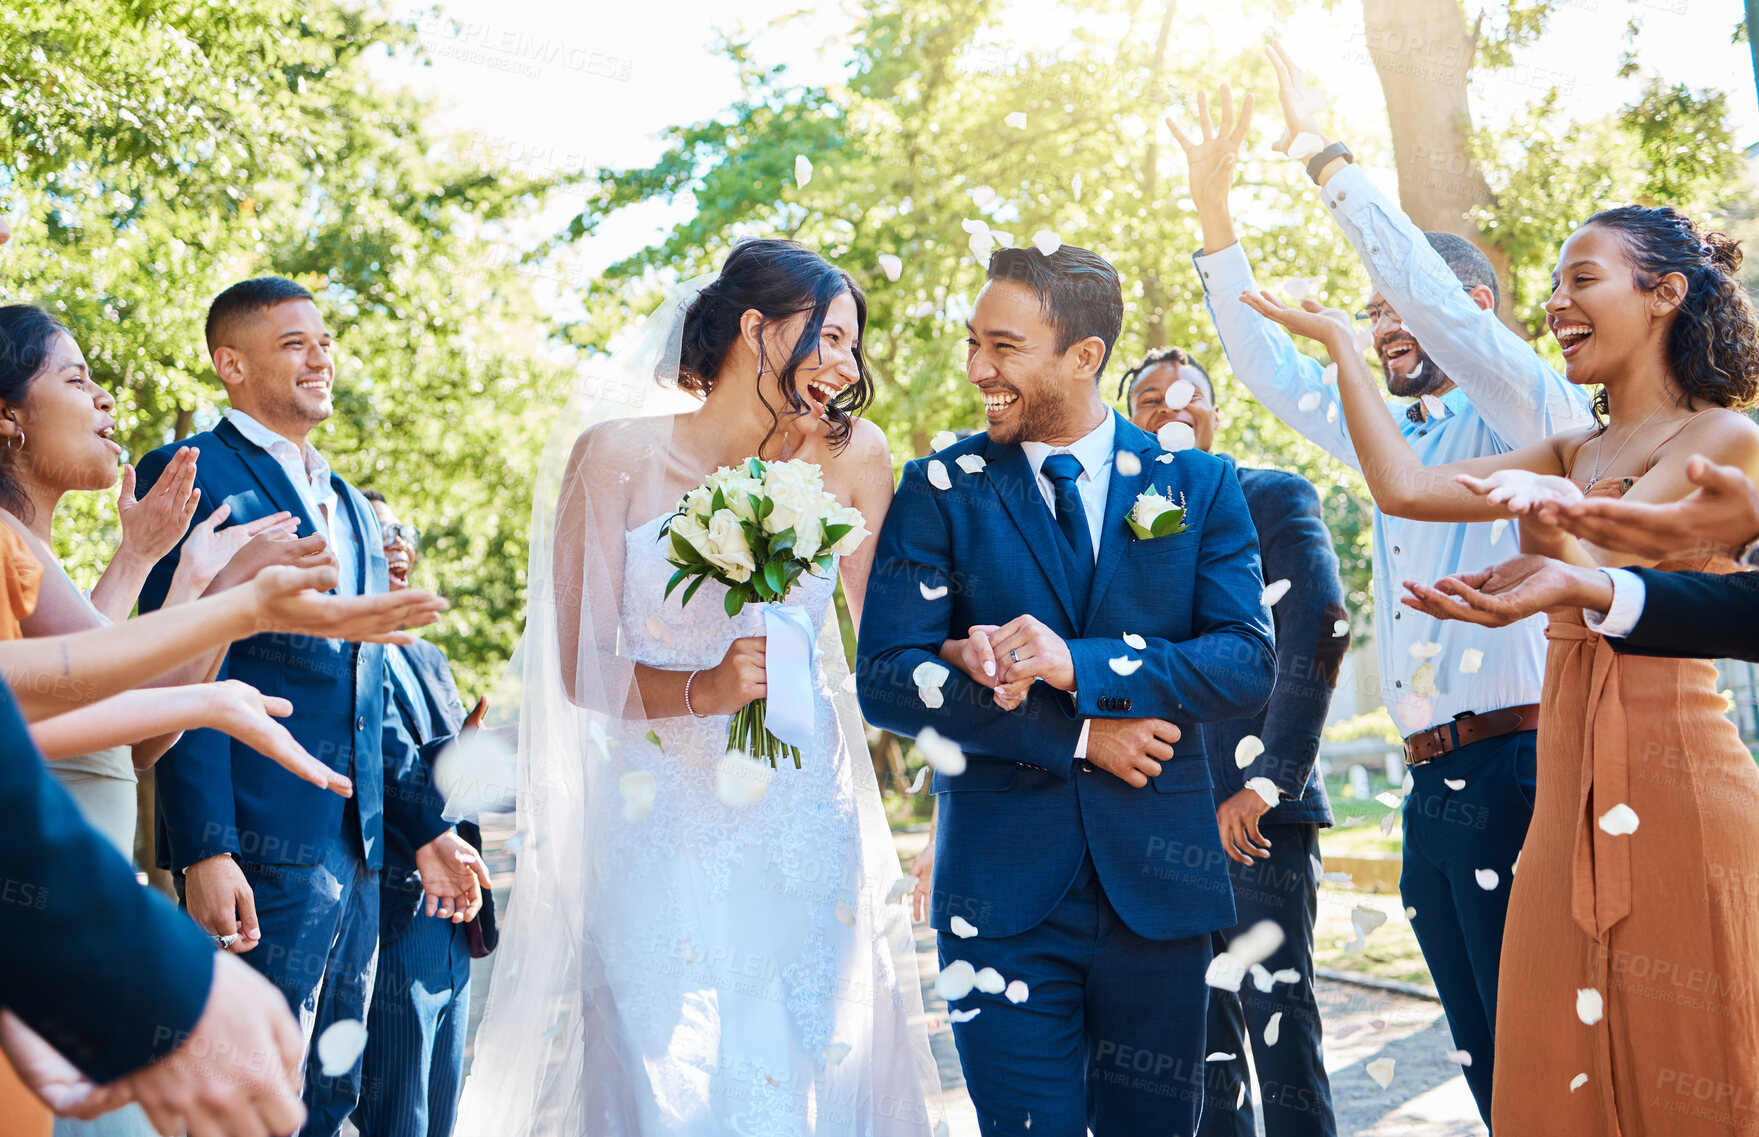 Buy stock photo Happy, wedding ceremony and couple walking with petals and guests throw in celebration of romance. Romantic, flowers and bride with bouquet and groom with crowd celebrating at outdoor marriage event.